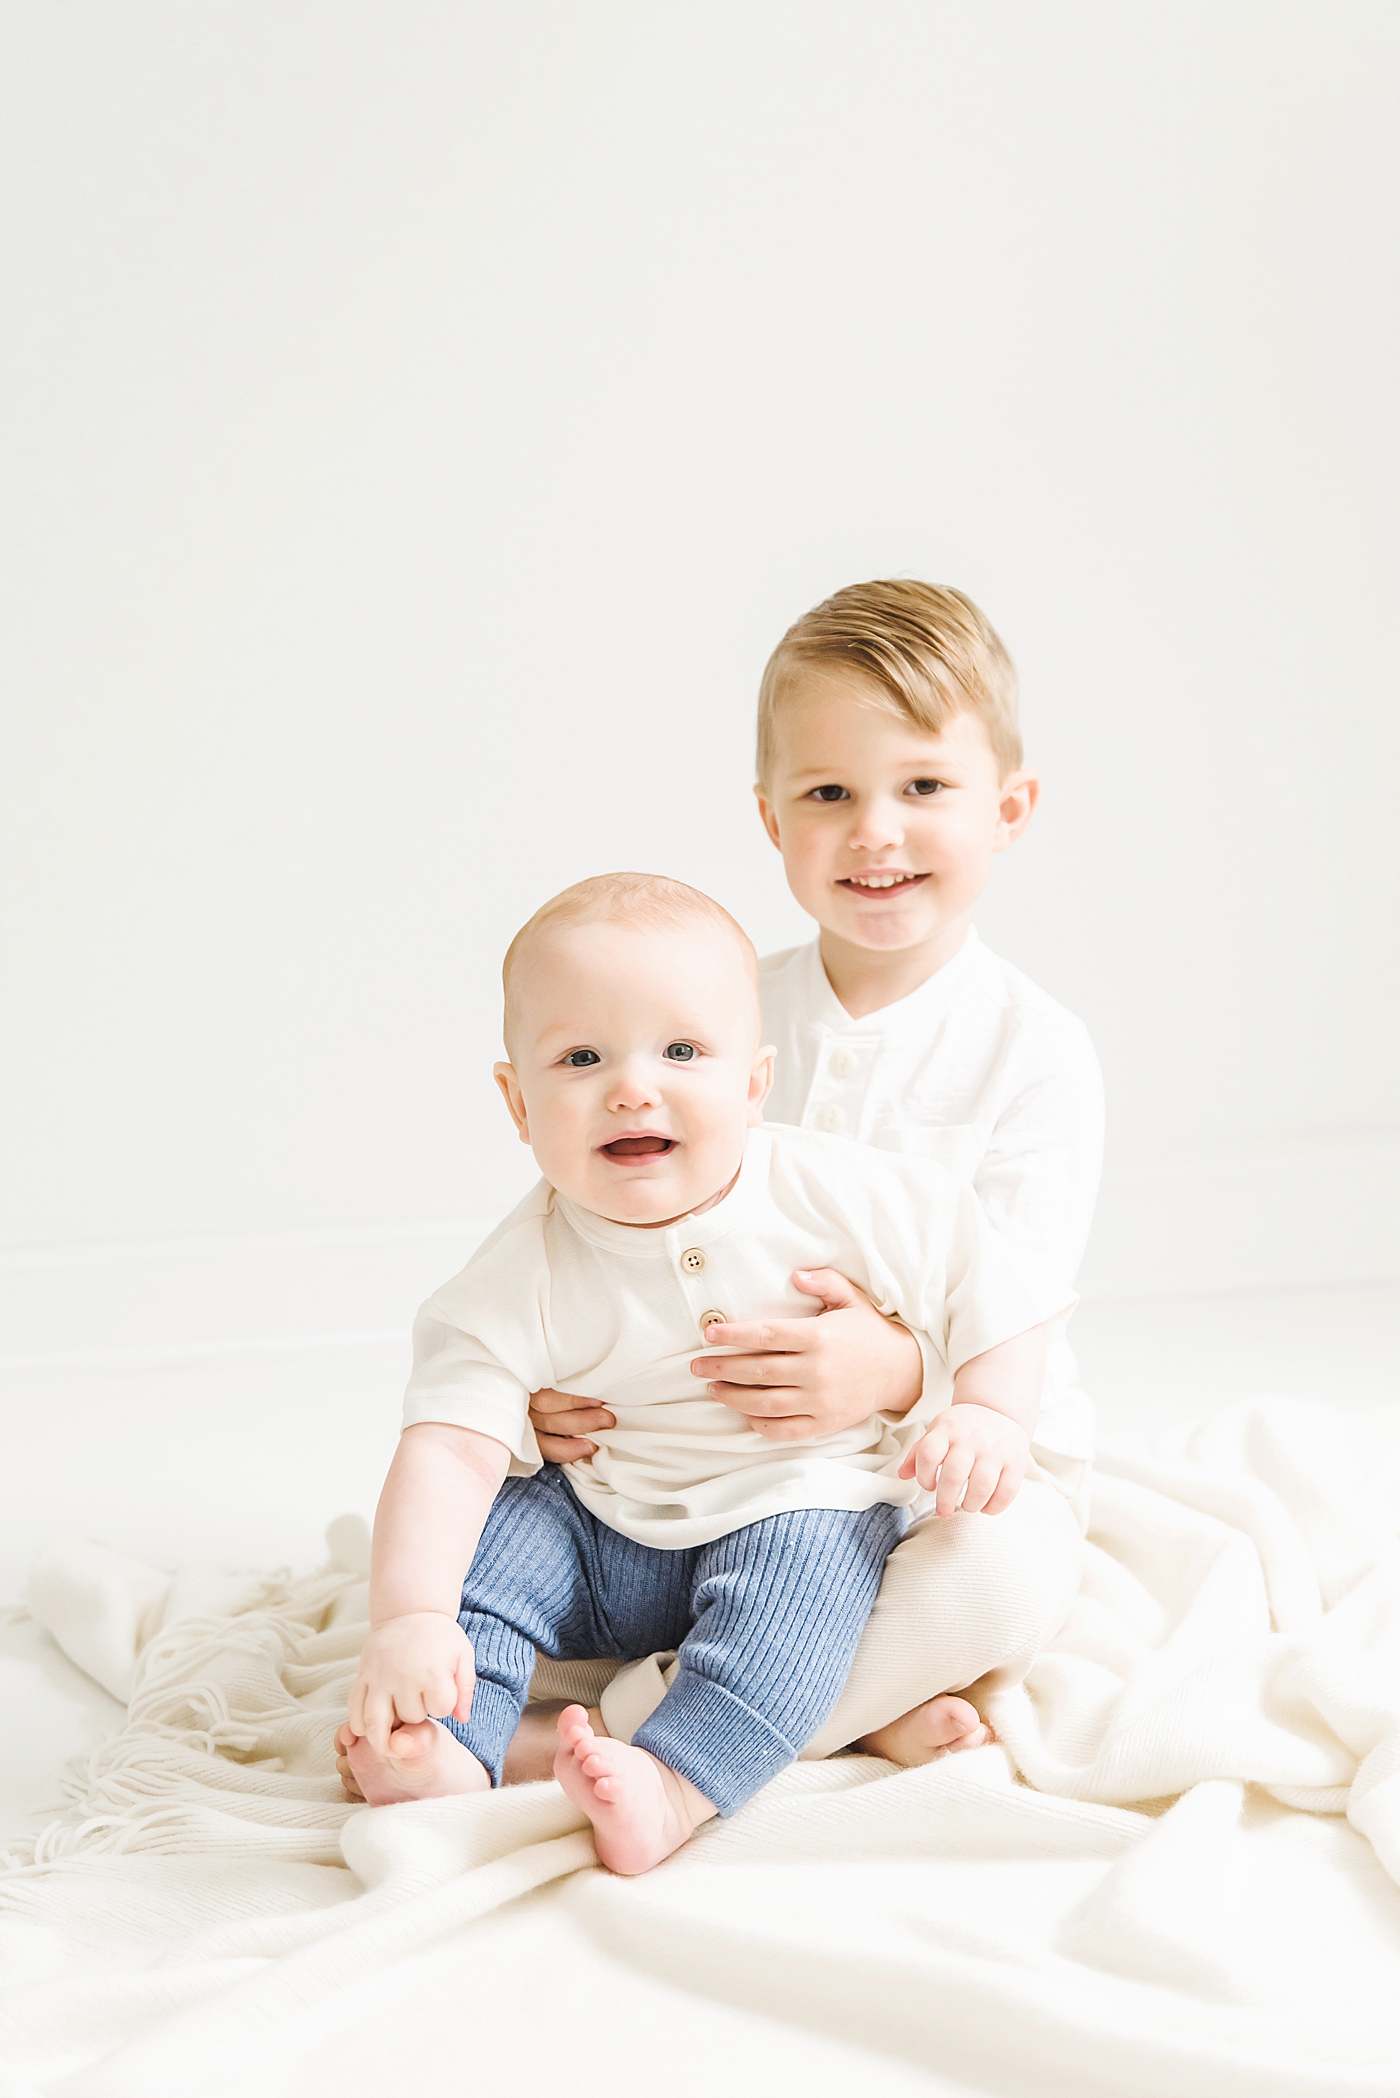 Brothers in white smiling | Photo by Anna Wisjo Photography 